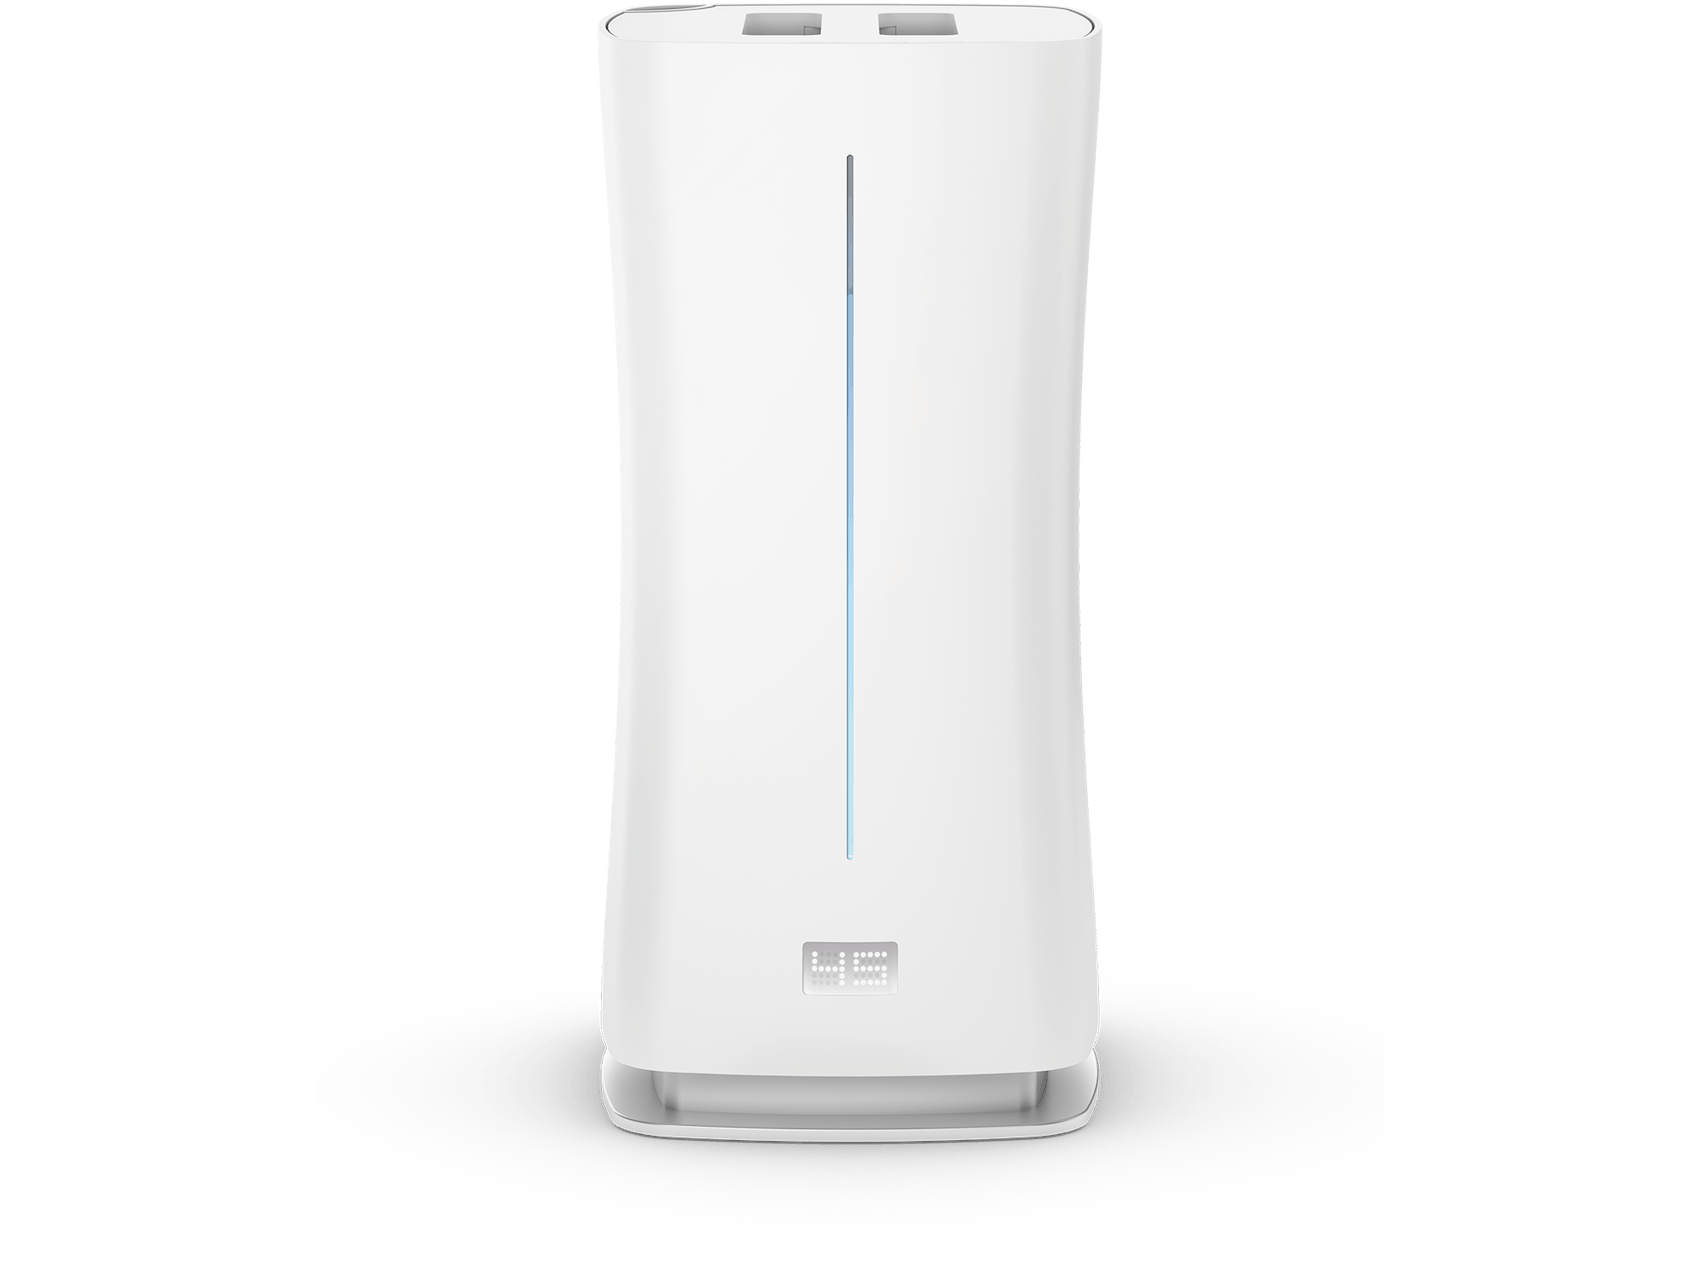 Eva humidifier by Stadler Form in white as front view